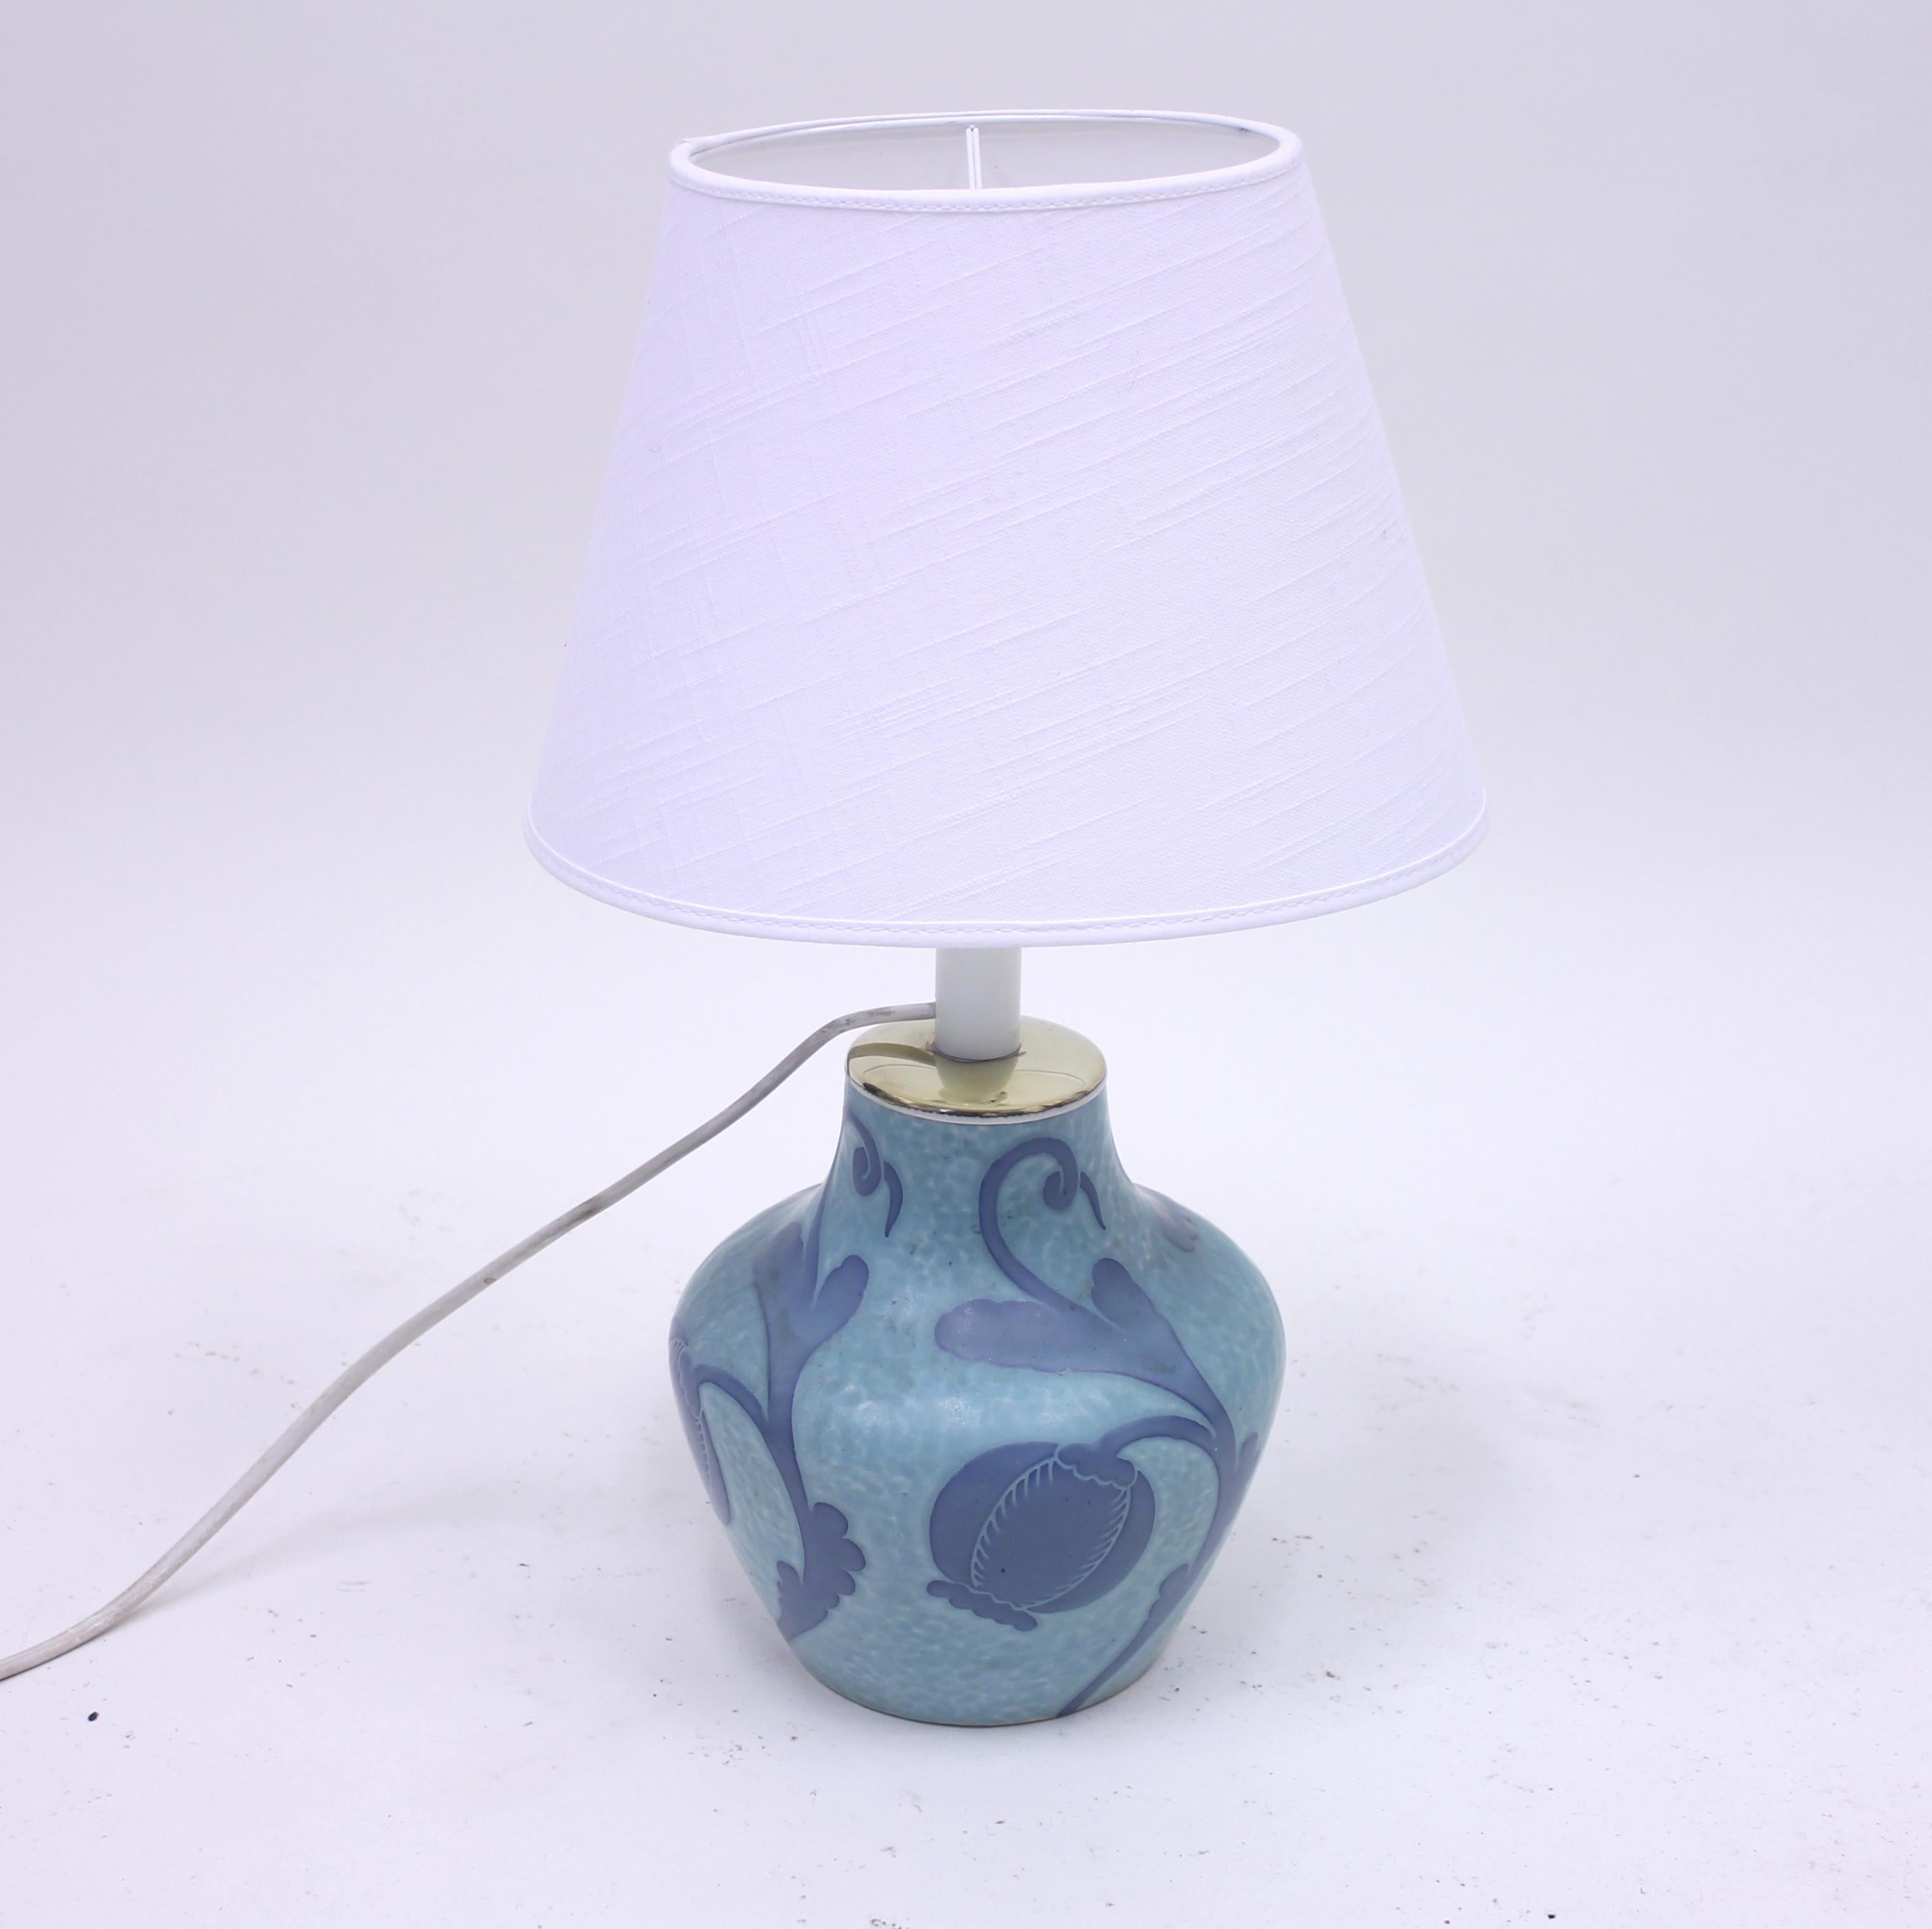 Sgrafitto table lamp in light blue stoneware decorated with dark blue flower motifs and brass light fitting, designed by Swedish ceramicist Josef Ekberg for Gustavsberg in 1923. Very good condition with minimal ware. Later white shade. Marked JE,